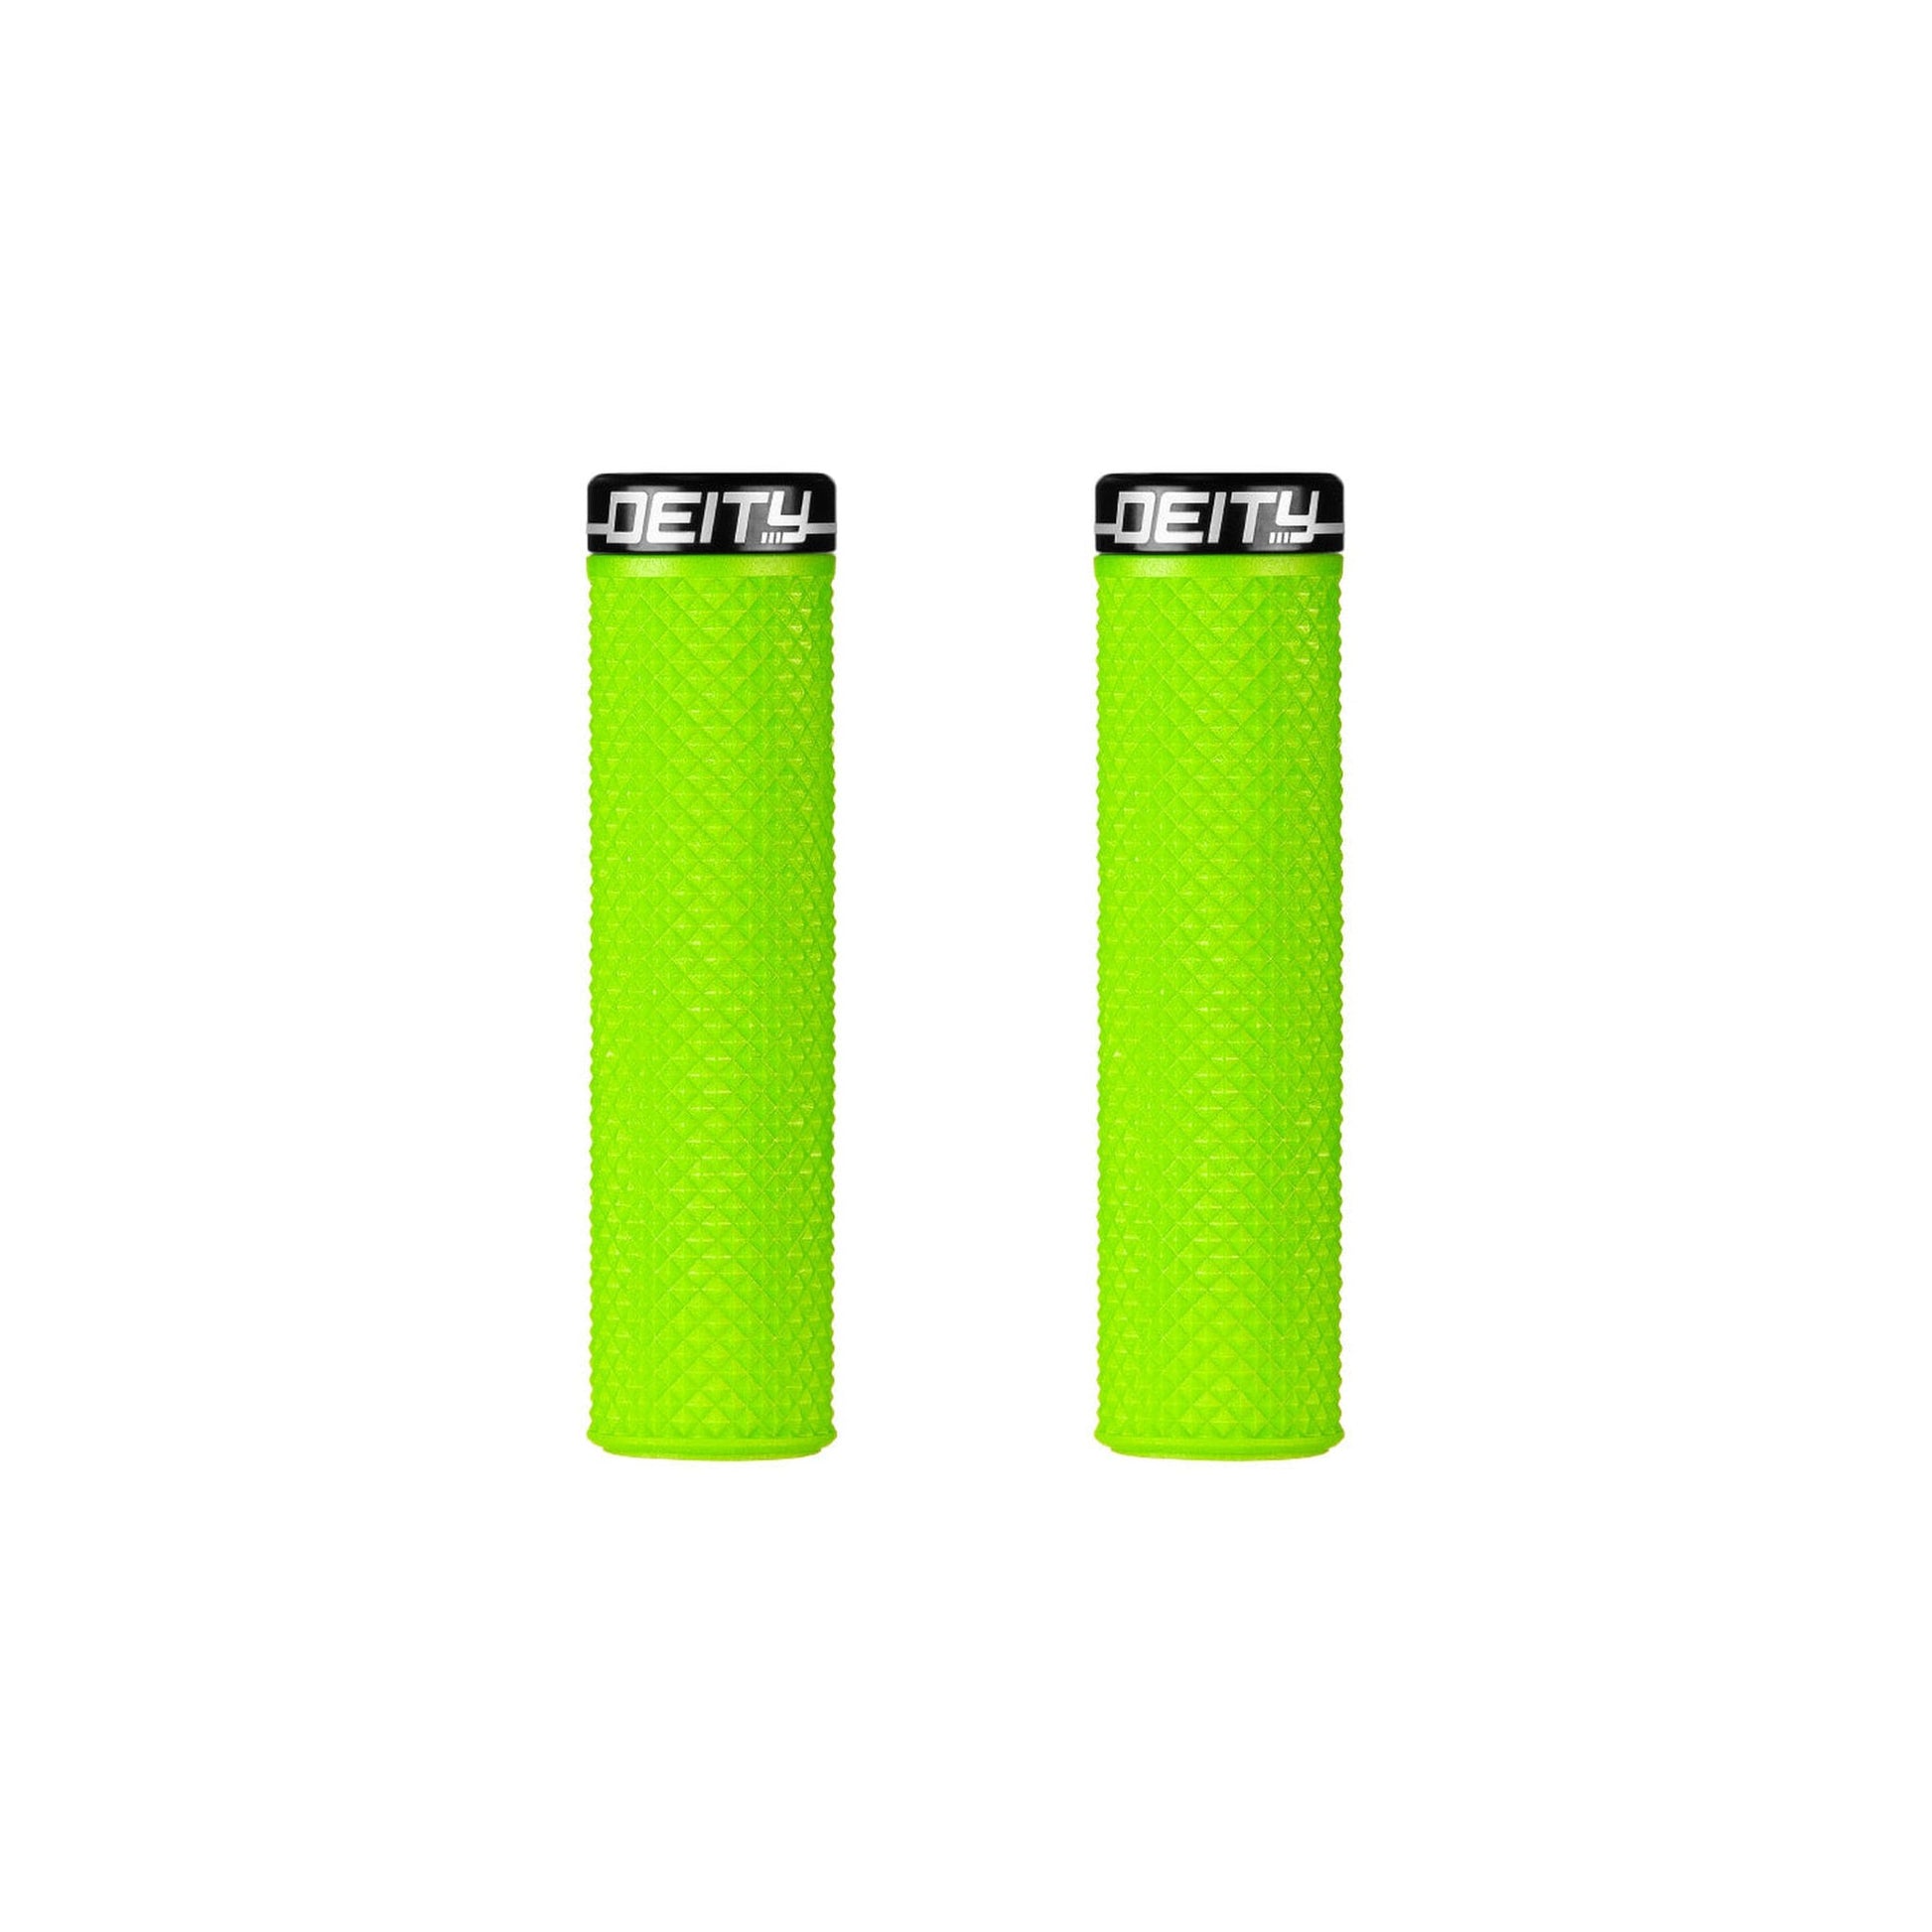 Deity Supracush Grips | completecyclist - DEITY has done it again!! We’ve gone back to the drawing board and redeveloped our TRC+ rubber compound to deliver 33% more grip and cushion without